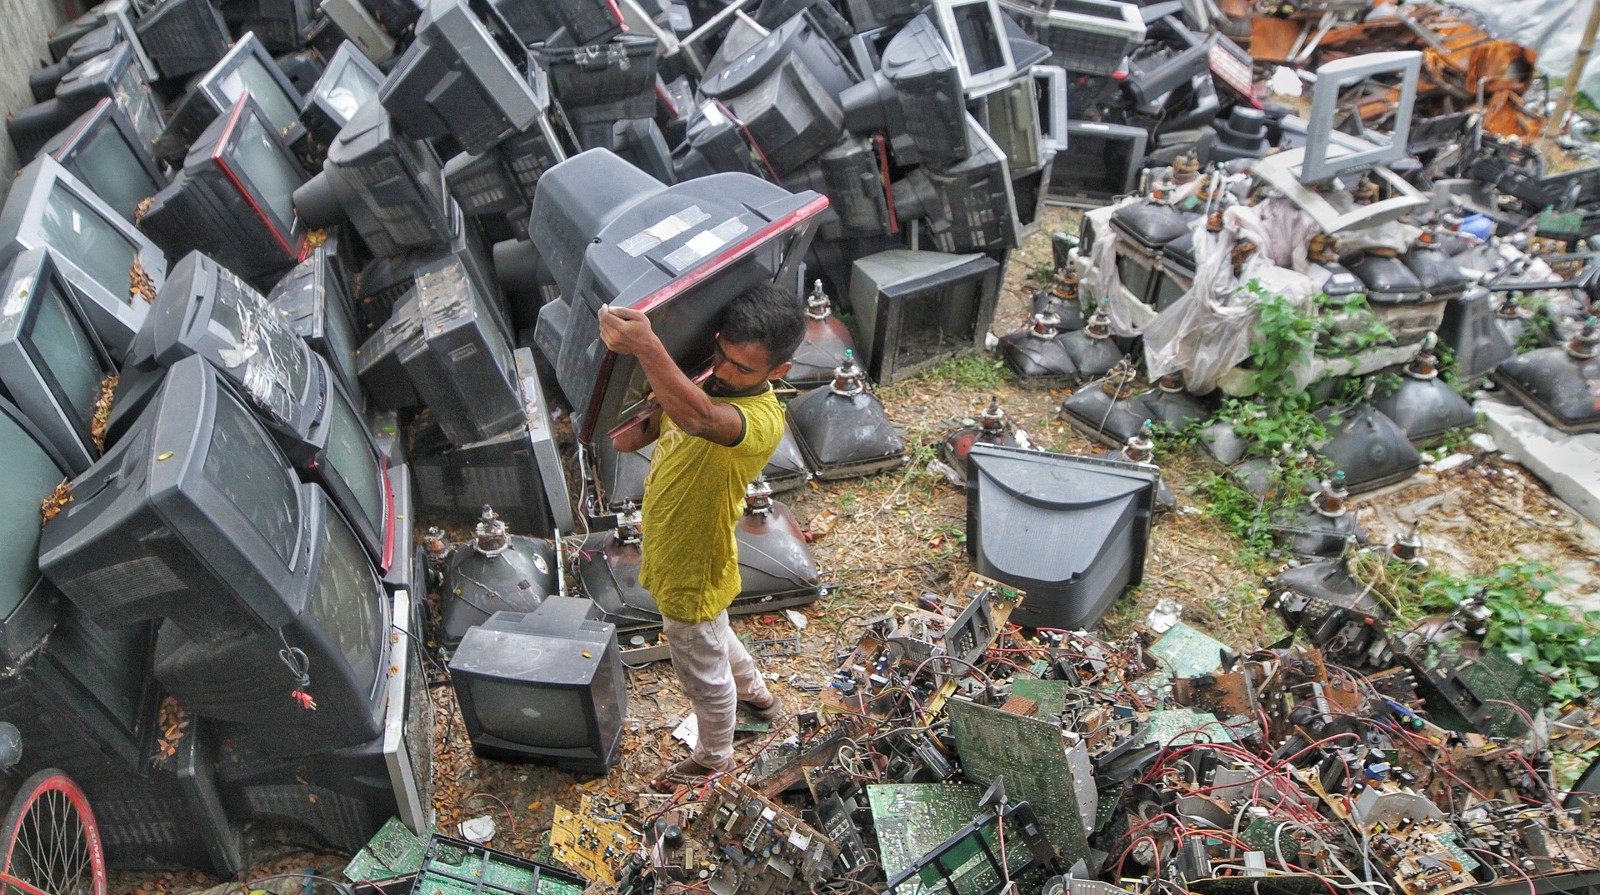 A man carries a television through piles of dumped electrical items